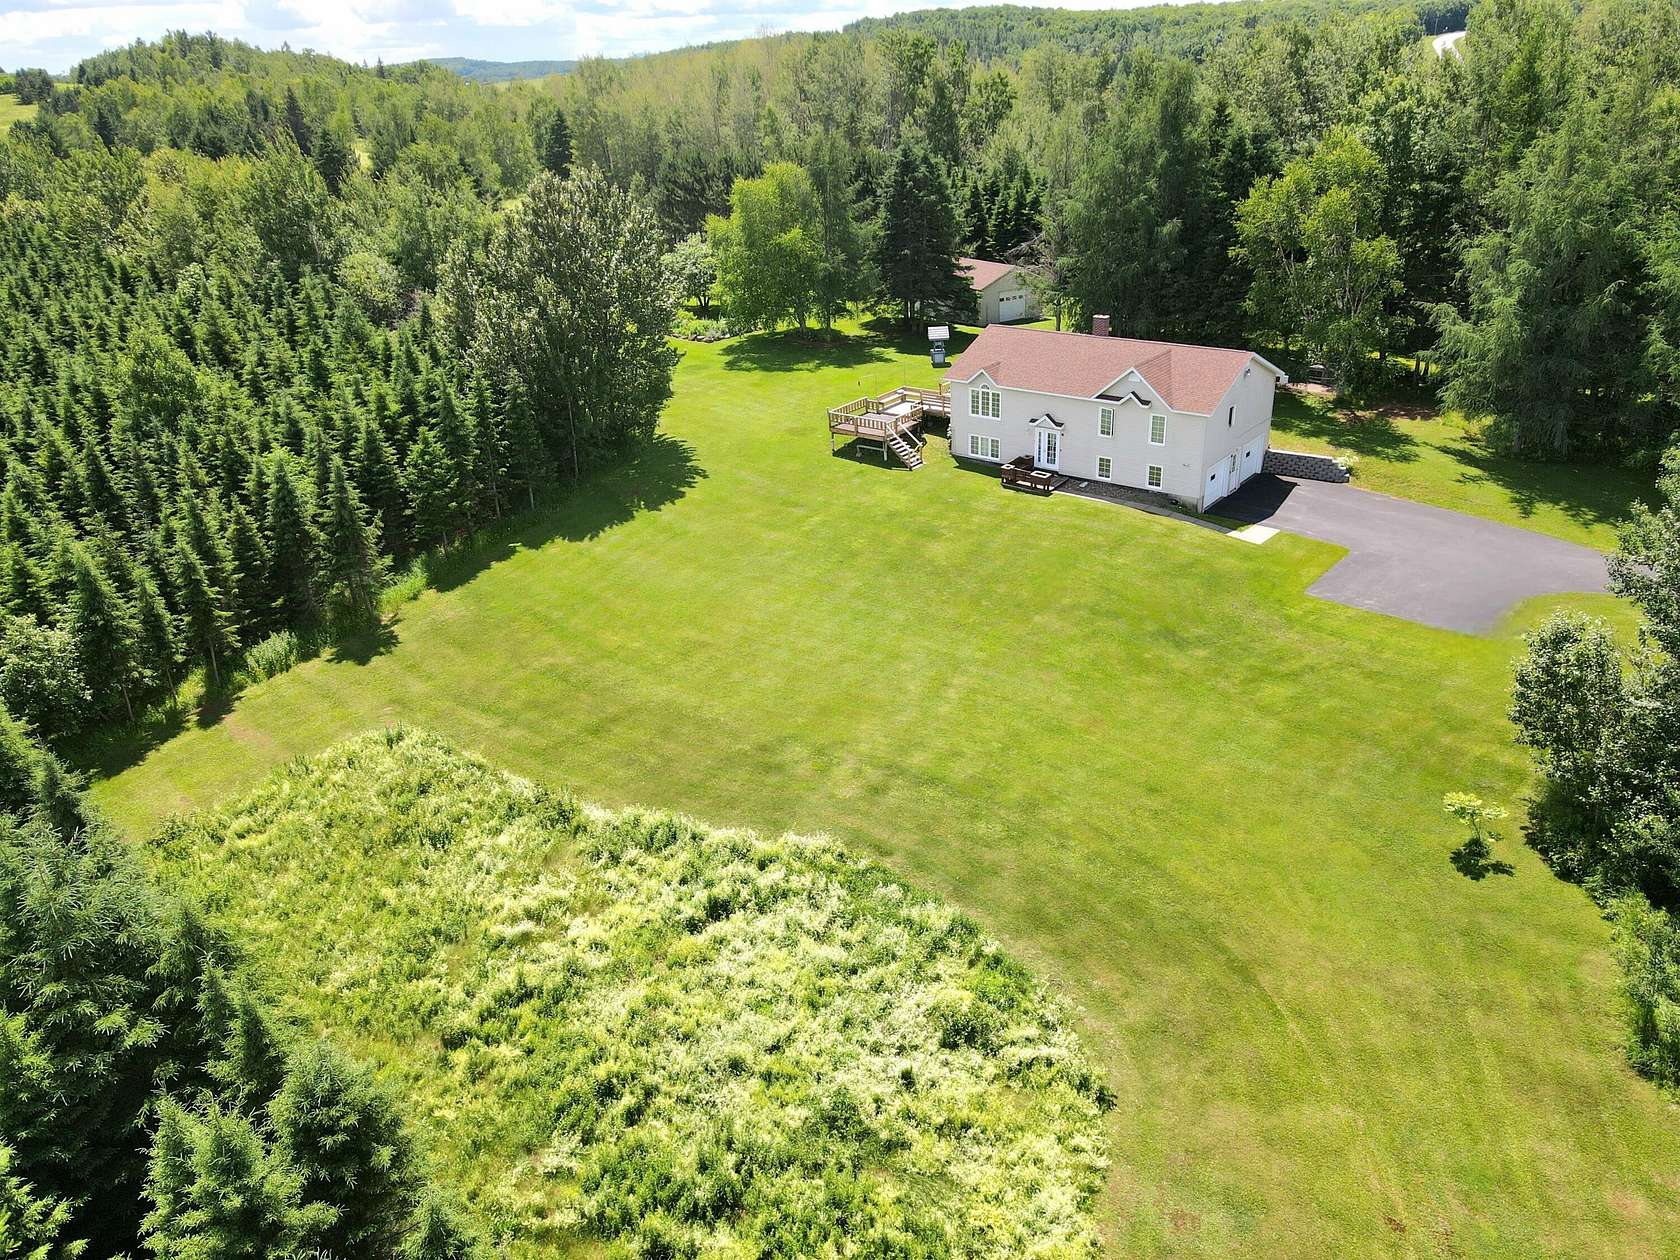 80 Acres of Land with Home for Sale in Fort Fairfield, Maine